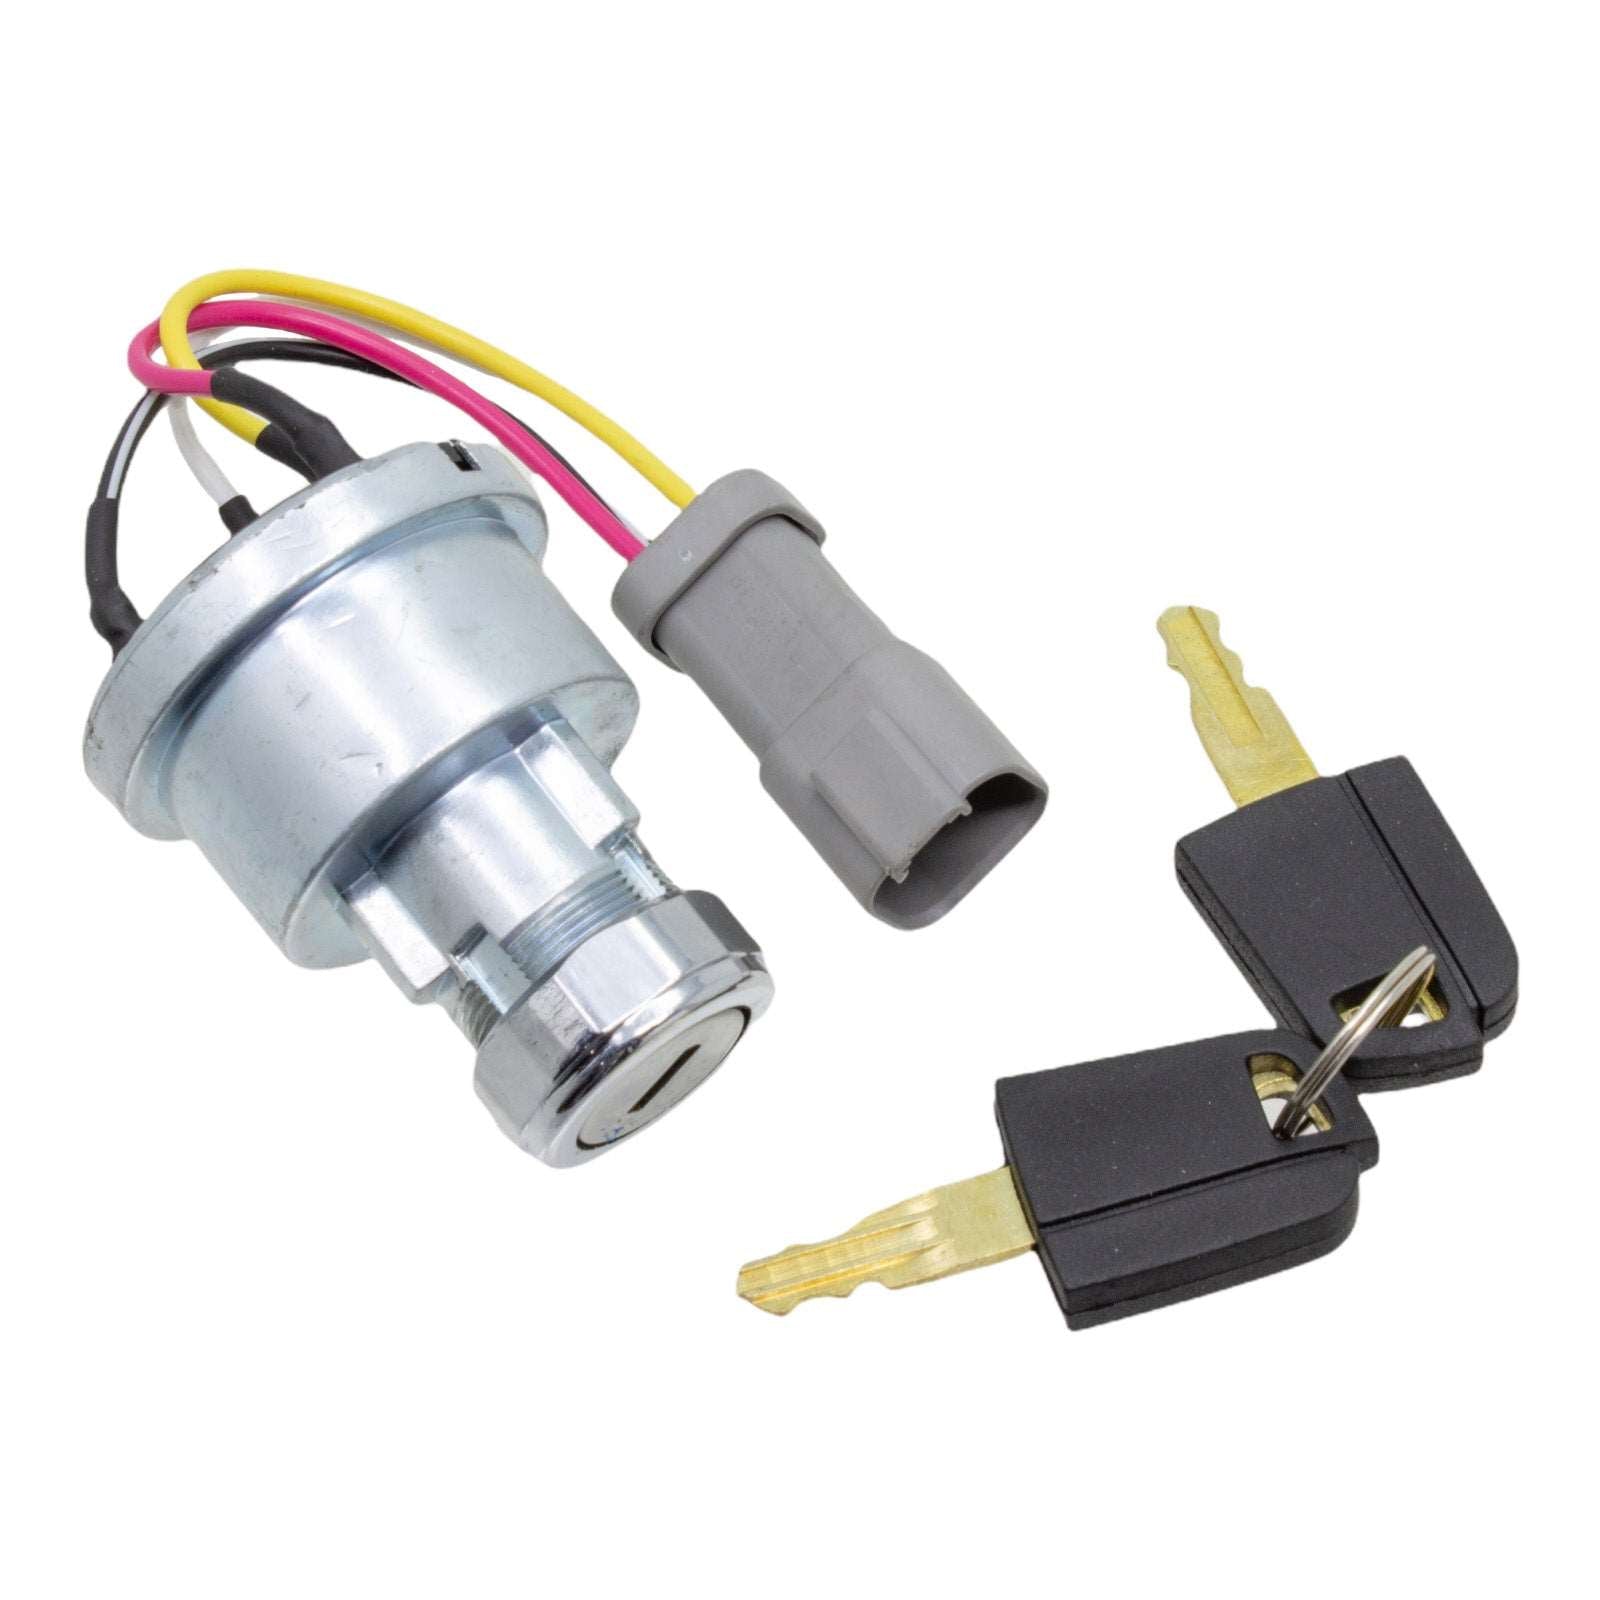 Duraforce 110-7887, Ignition Switch For Caterpillar